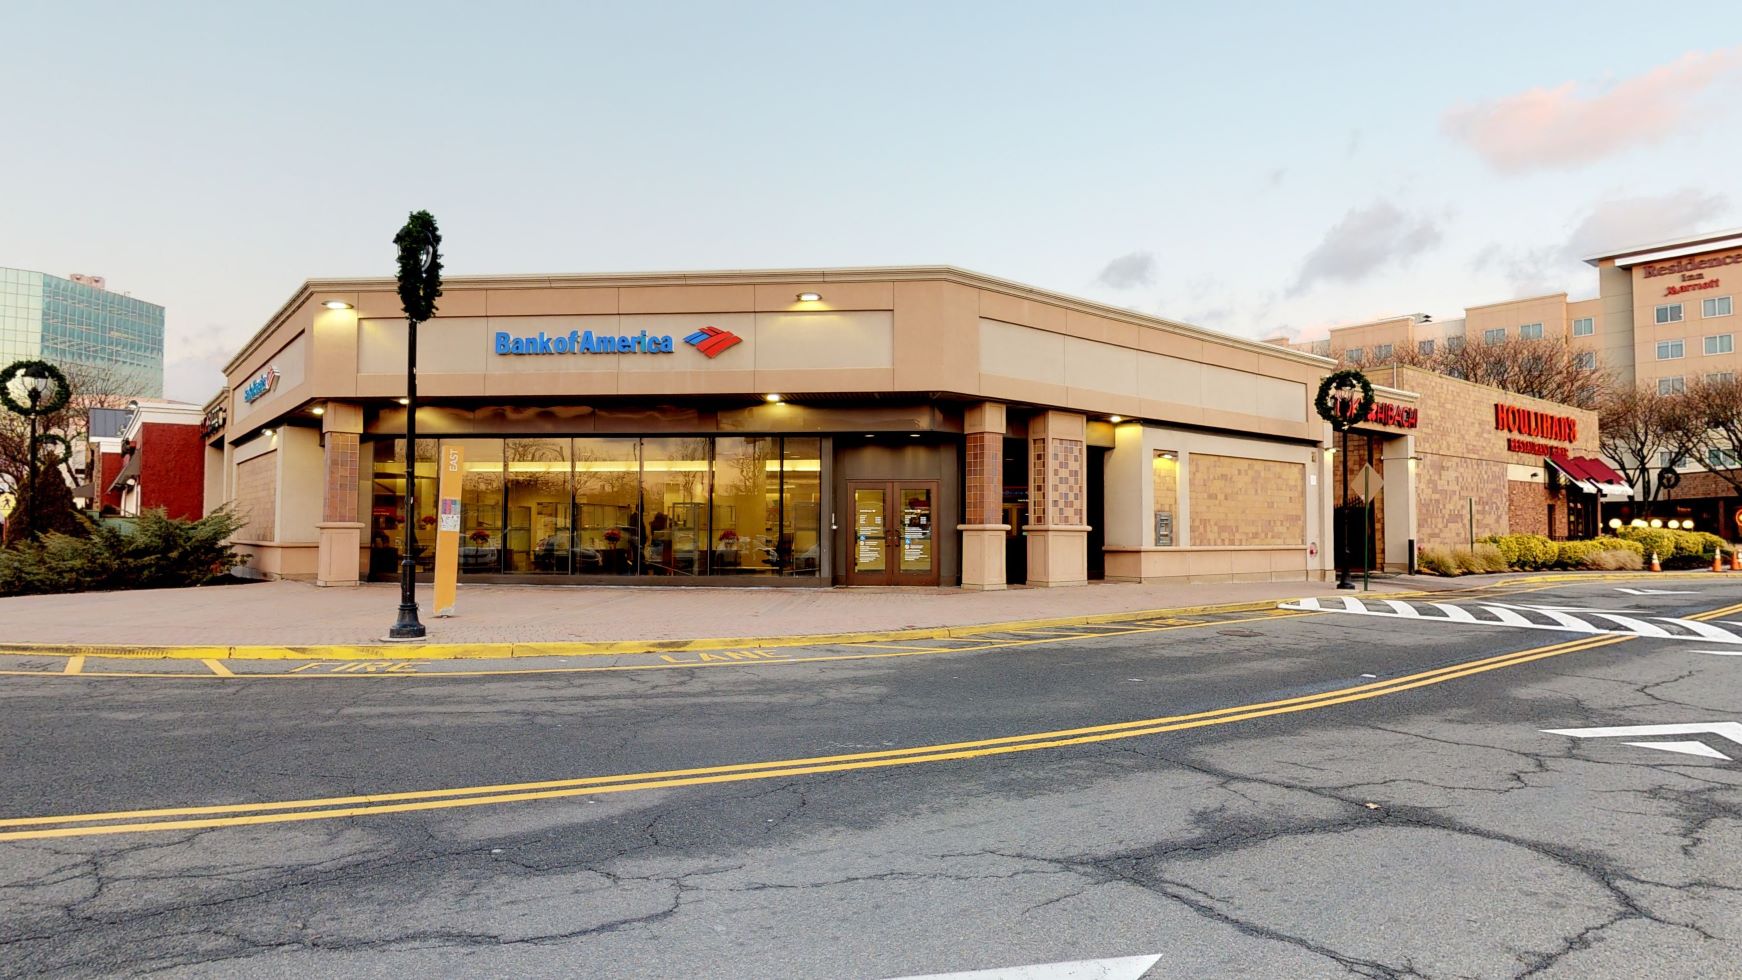 Bank of America financial center with walk-up ATM | 700 Plaza Dr, Secaucus, NJ 07094